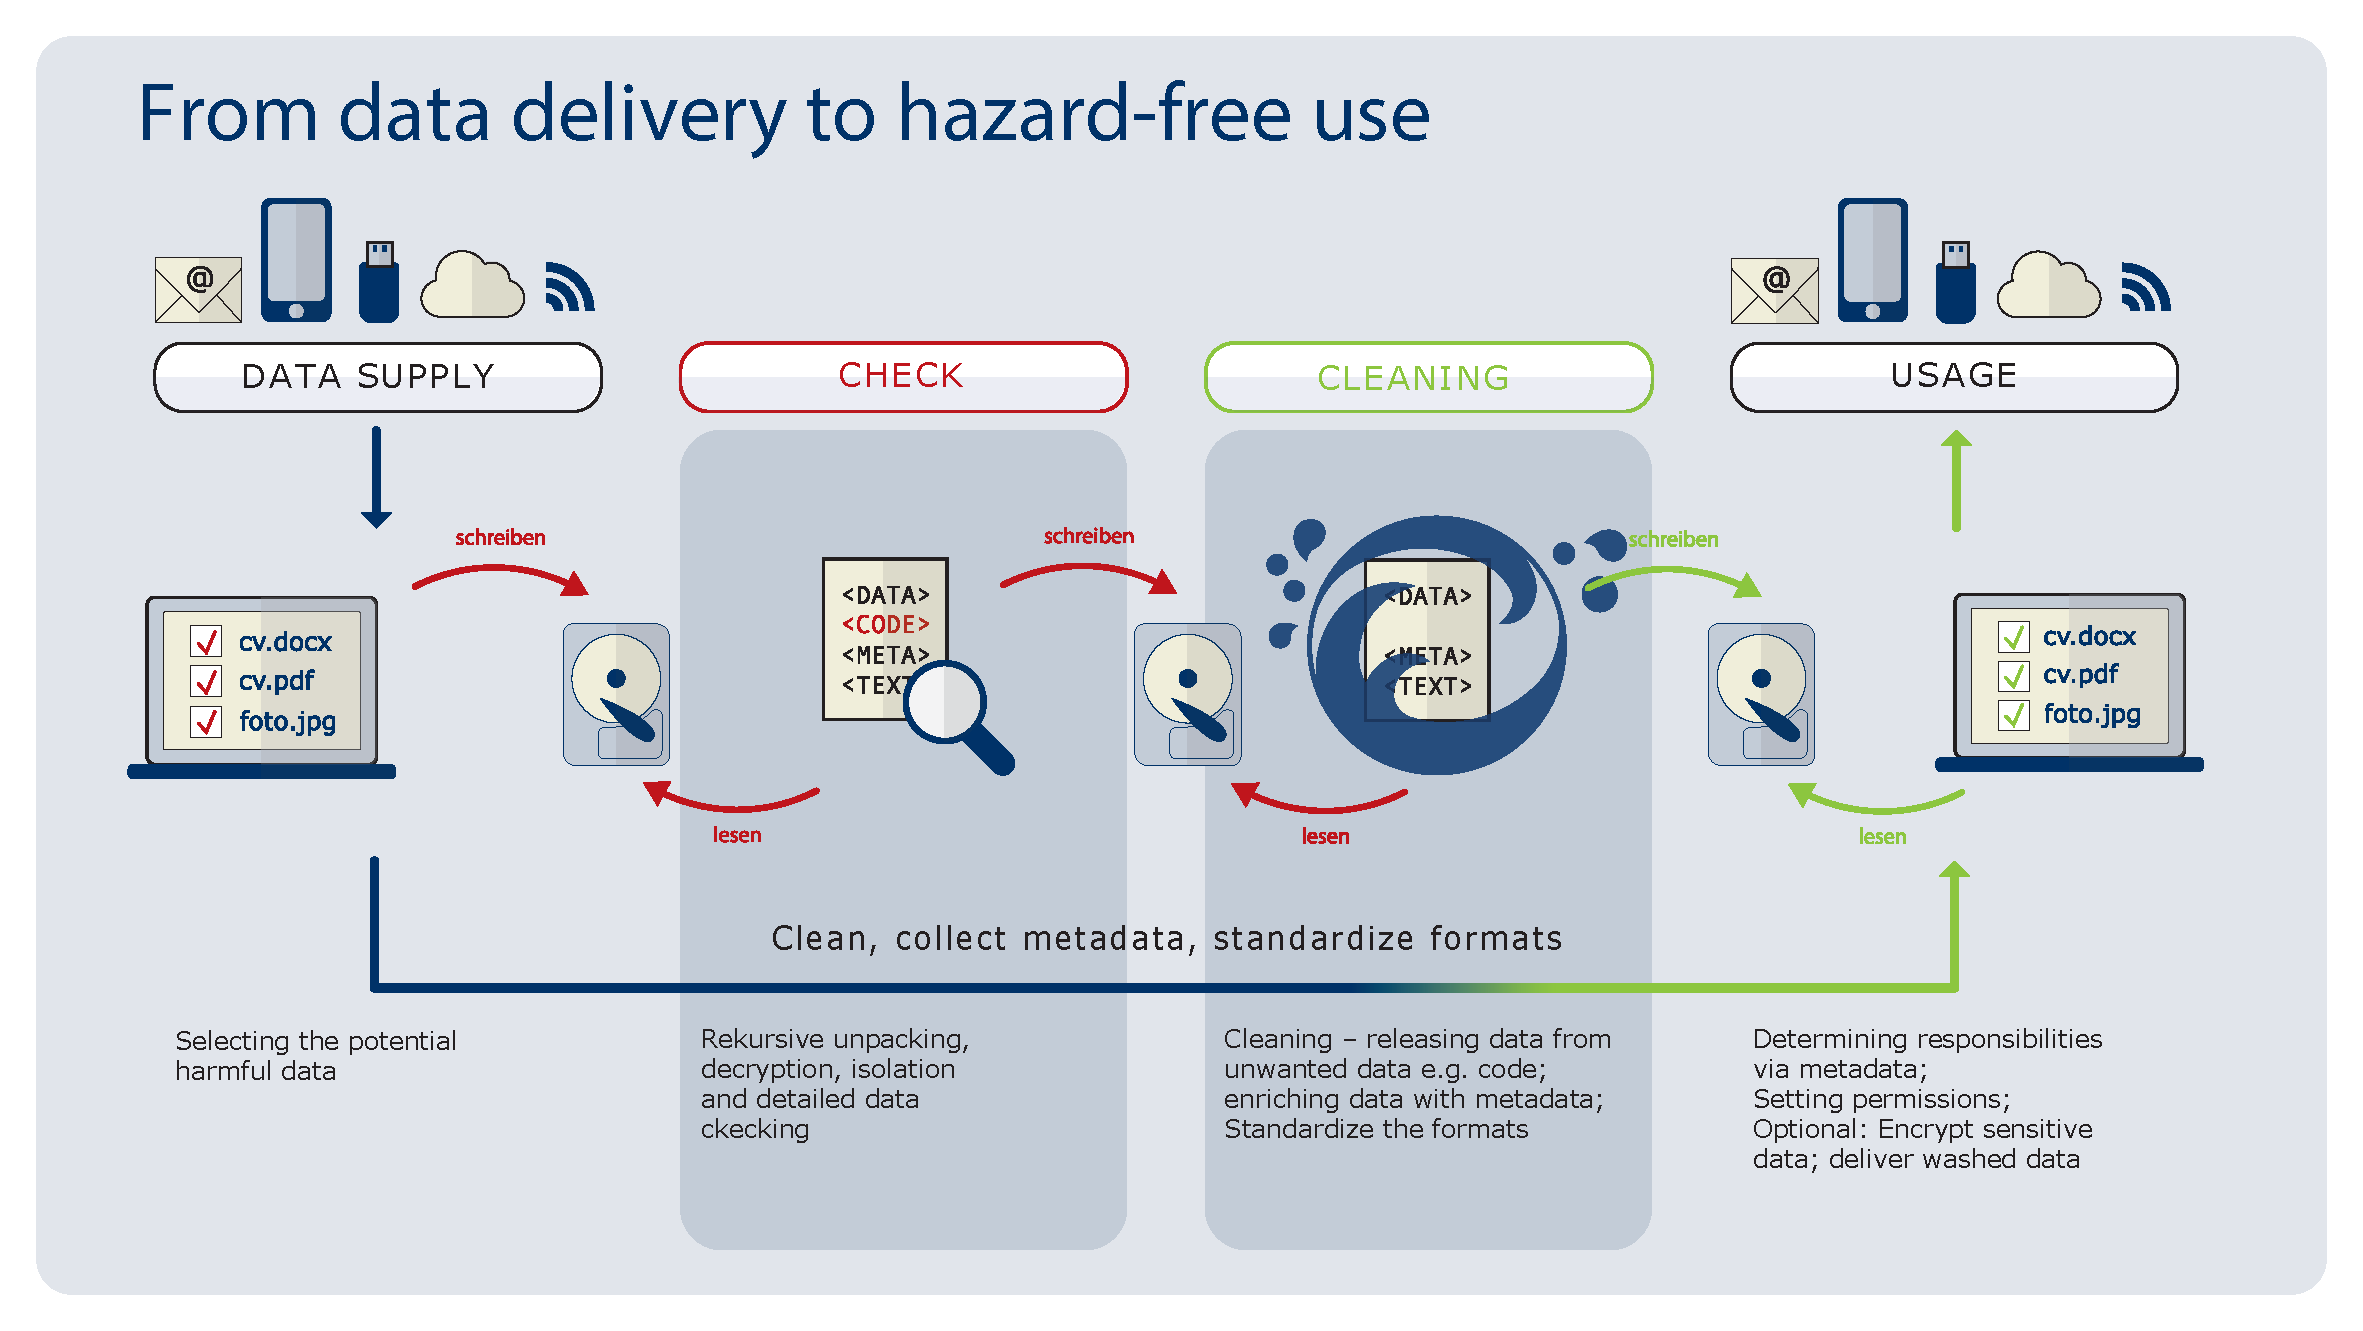 From data delivery to hazard-free use